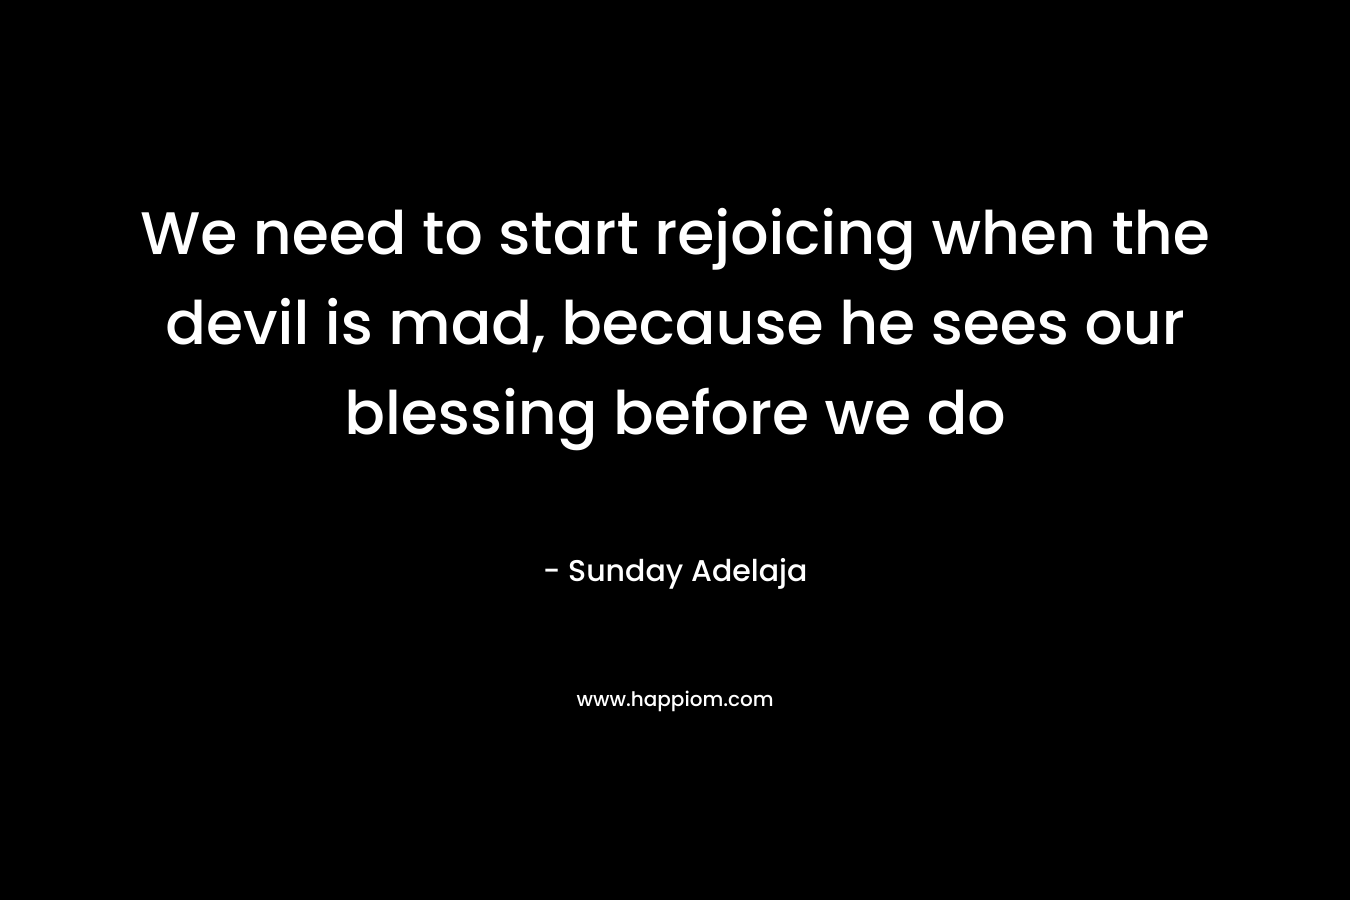 We need to start rejoicing when the devil is mad, because he sees our blessing before we do – Sunday Adelaja